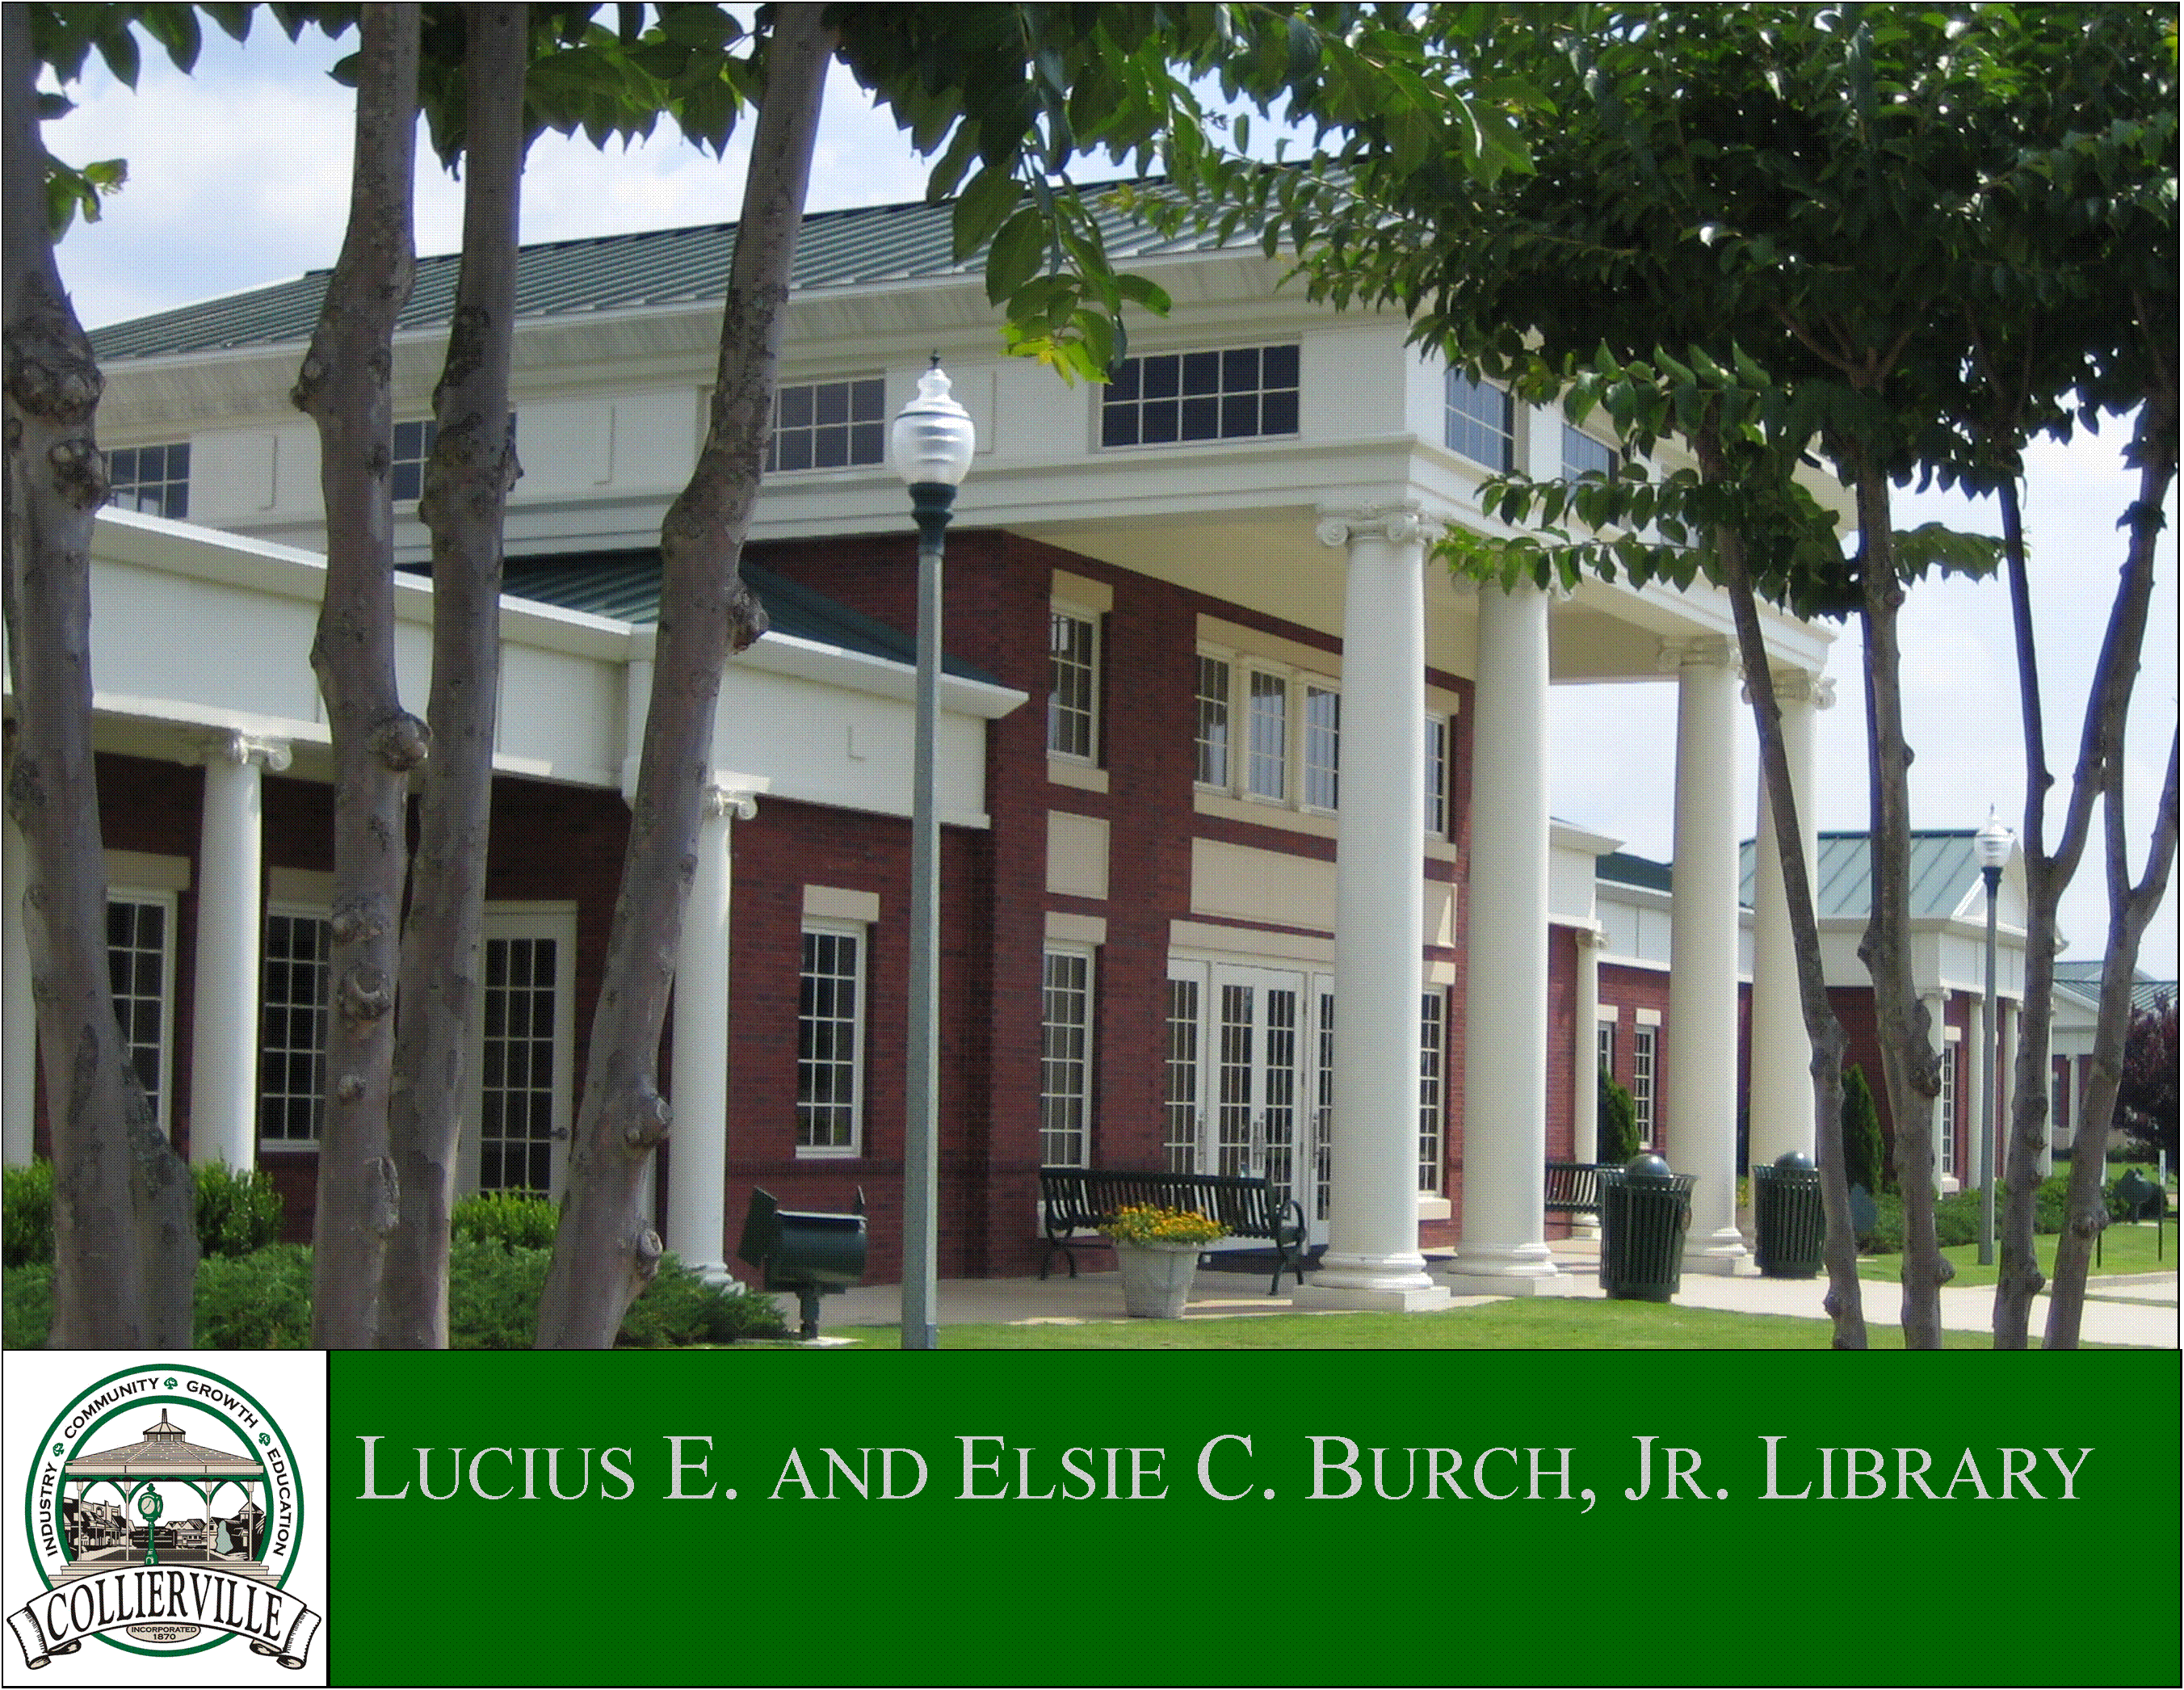 Lucius E. and Elsie C. Burch, Jr. Library